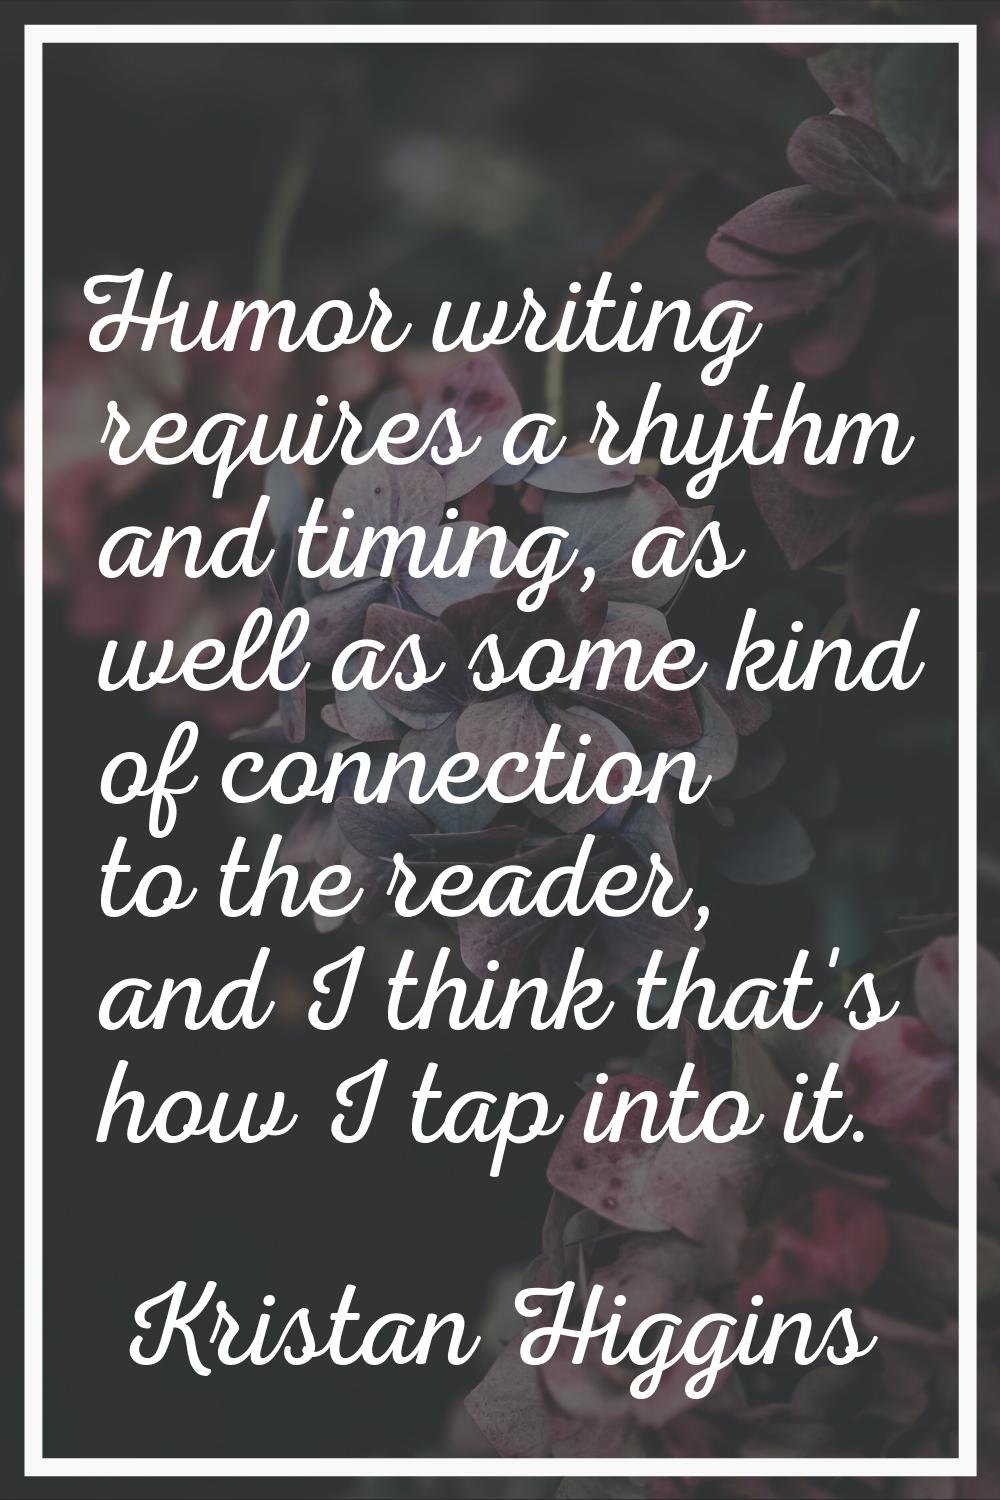 Humor writing requires a rhythm and timing, as well as some kind of connection to the reader, and I